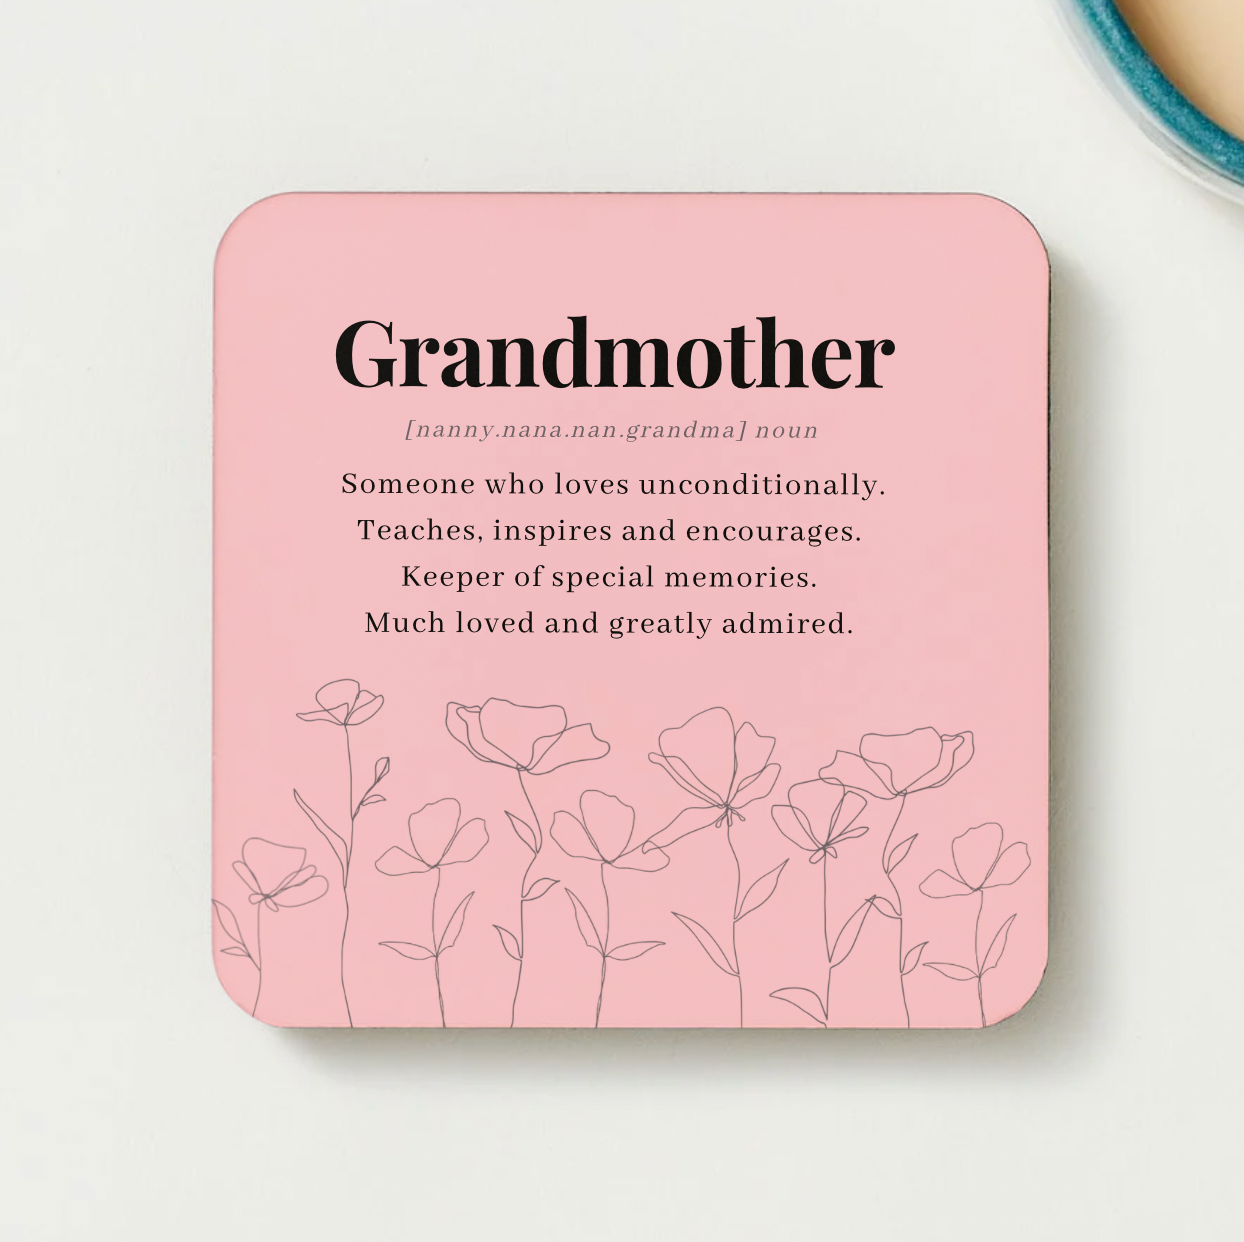 Candle and Coaster Gift for grandmother Grandmother gift grandmother treat grandmother gift box birthday gift coaster grandmother coaster